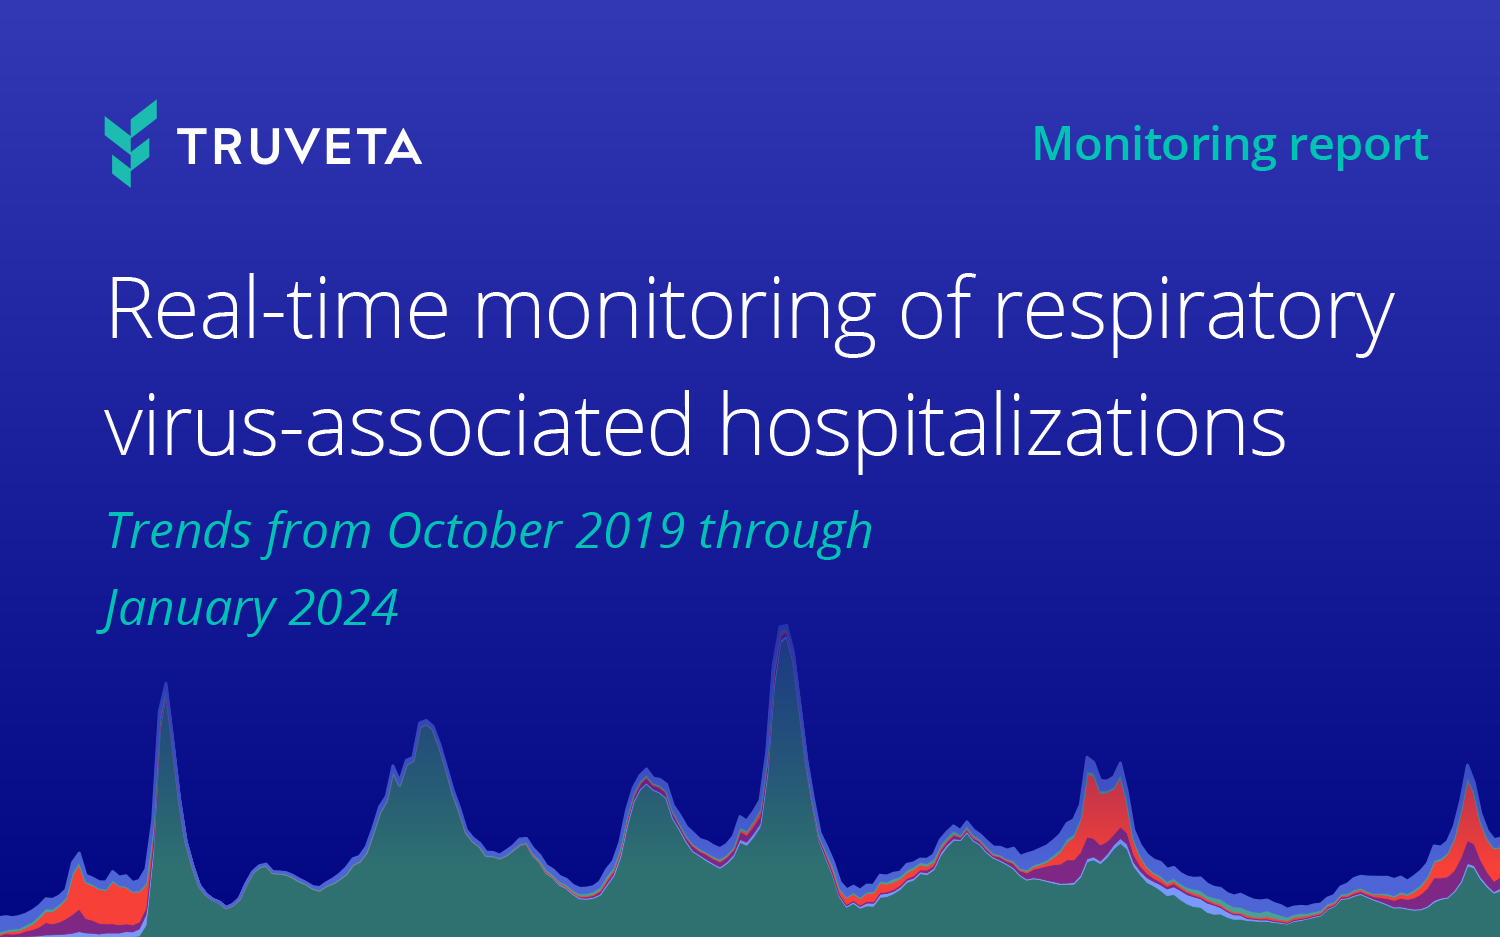 Truveta Research uses EHR data to monitor respiratory virus-associated hospitalizations (e.g., COVID, RSV, the flu, etc.) for all populations